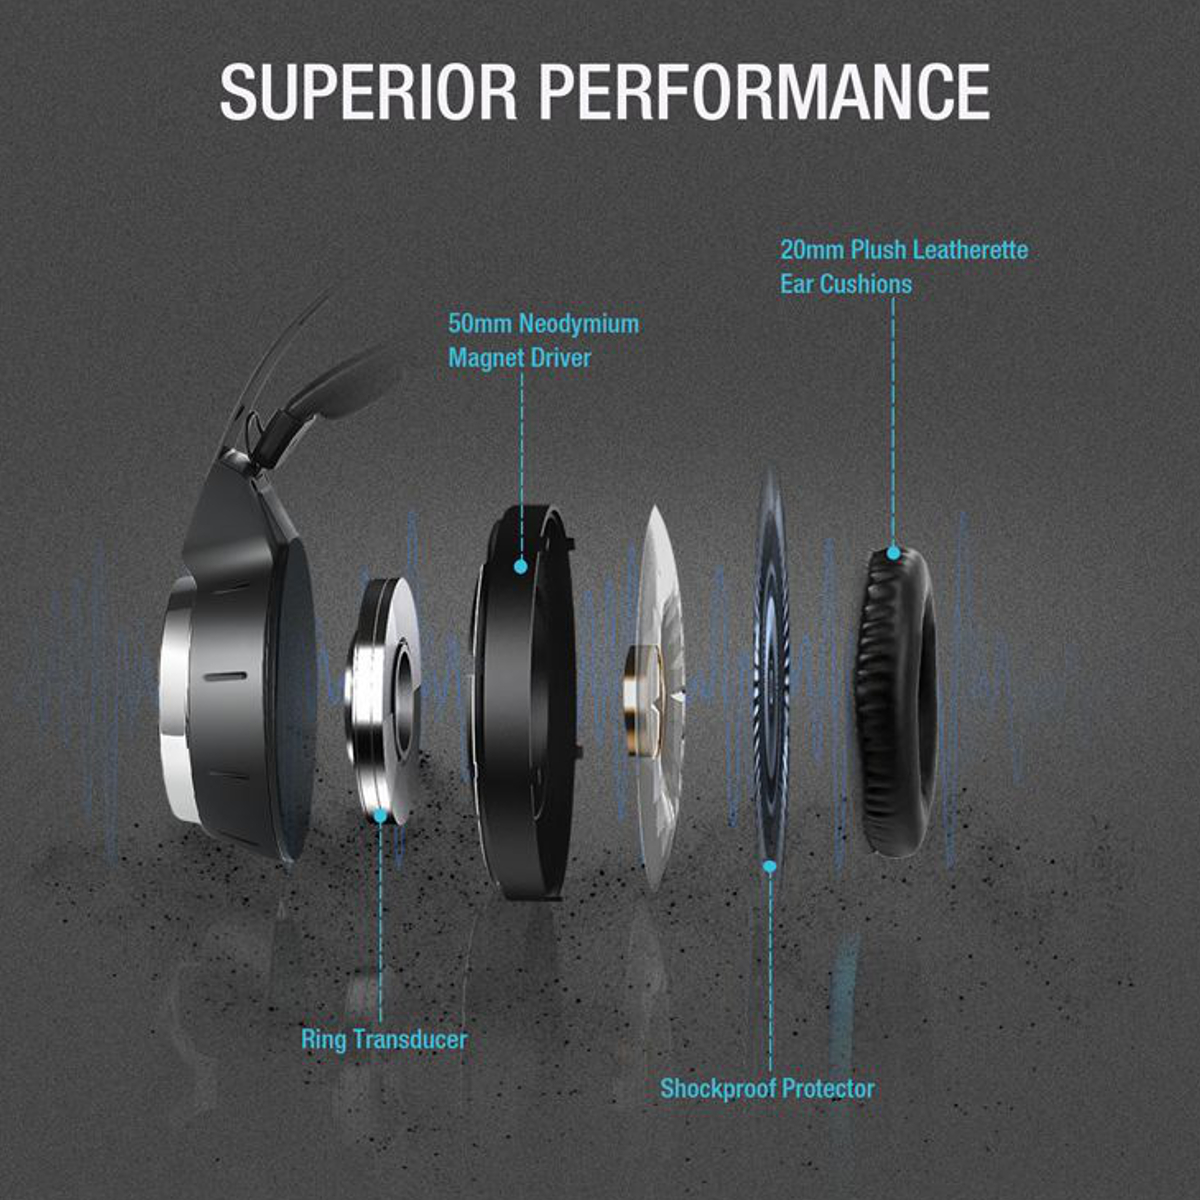 Find Bakeey Wired Stereo Bass Surround Noise Reduction Gaming Headset with Mic for PS4 New for Xbox One PC for Sale on Gipsybee.com with cryptocurrencies